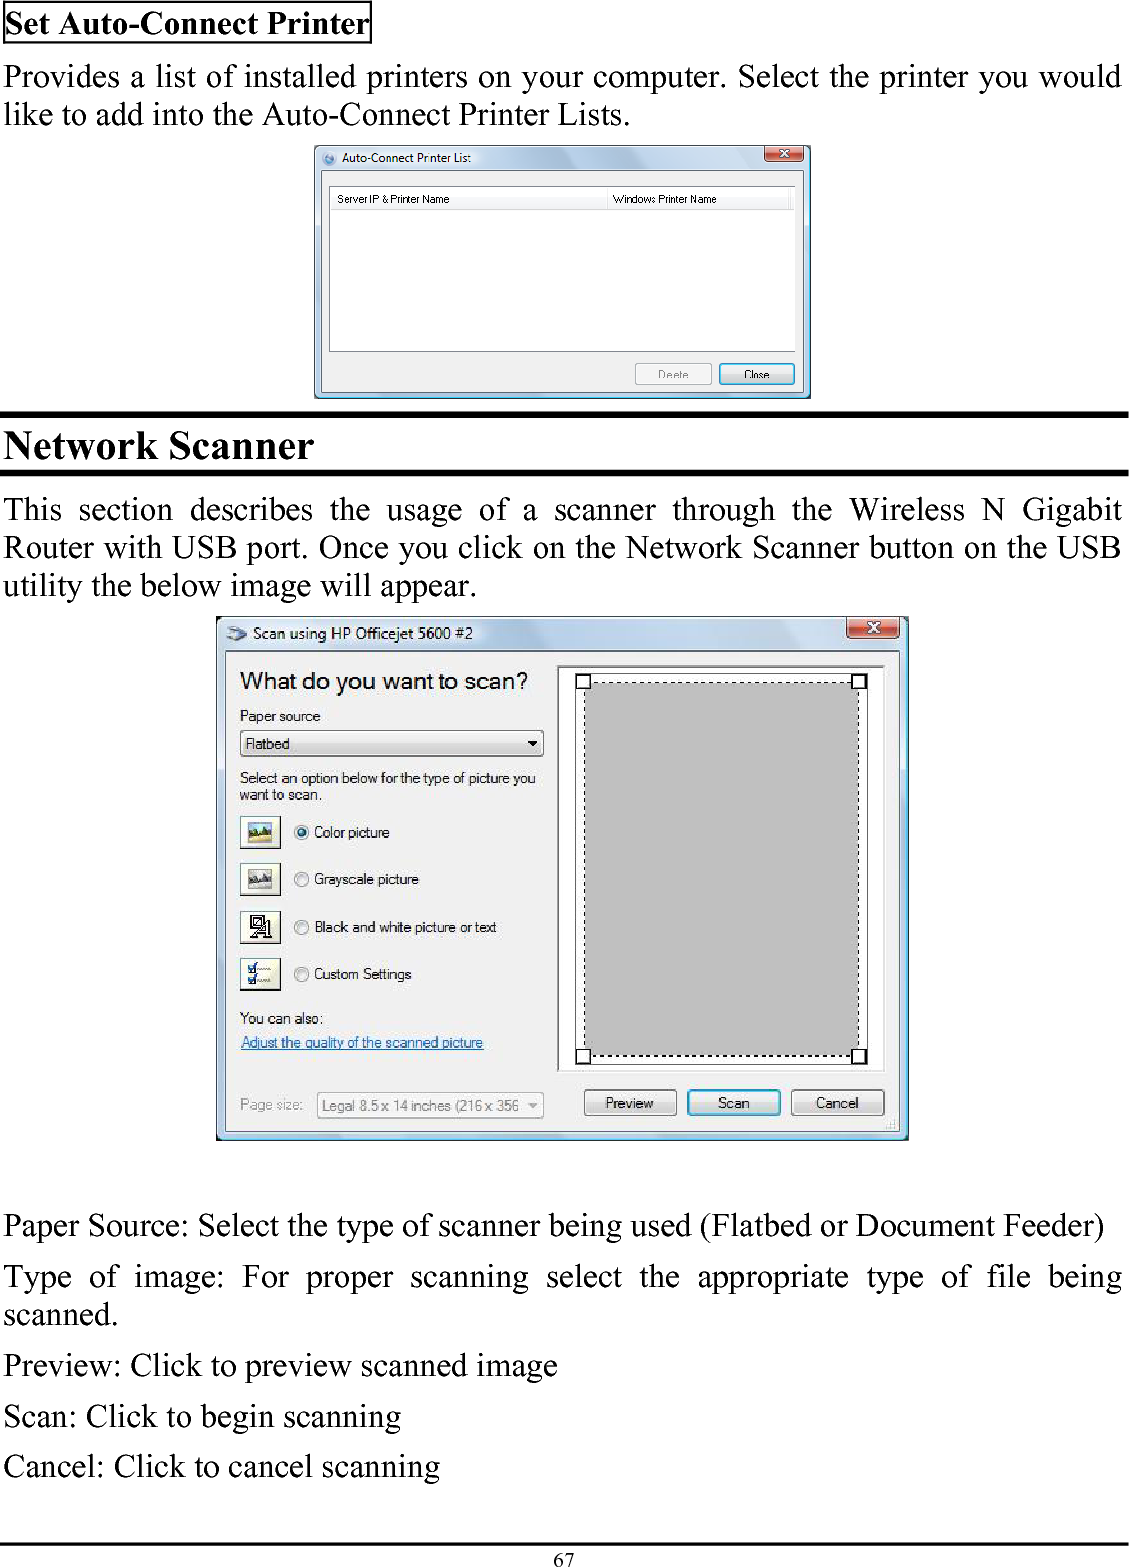 67 Set Auto-Connect Printer Provides a list of installed printers on your computer. Select the printer you would like to add into the Auto-Connect Printer Lists.   Network Scanner This section describes the usage of a scanner through the Wireless N Gigabit Router with USB port. Once you click on the Network Scanner button on the USB utility the below image will appear.   Paper Source: Select the type of scanner being used (Flatbed or Document Feeder) Type of image: For proper scanning select the appropriate type of file being scanned.  Preview: Click to preview scanned image Scan: Click to begin scanning  Cancel: Click to cancel scanning 